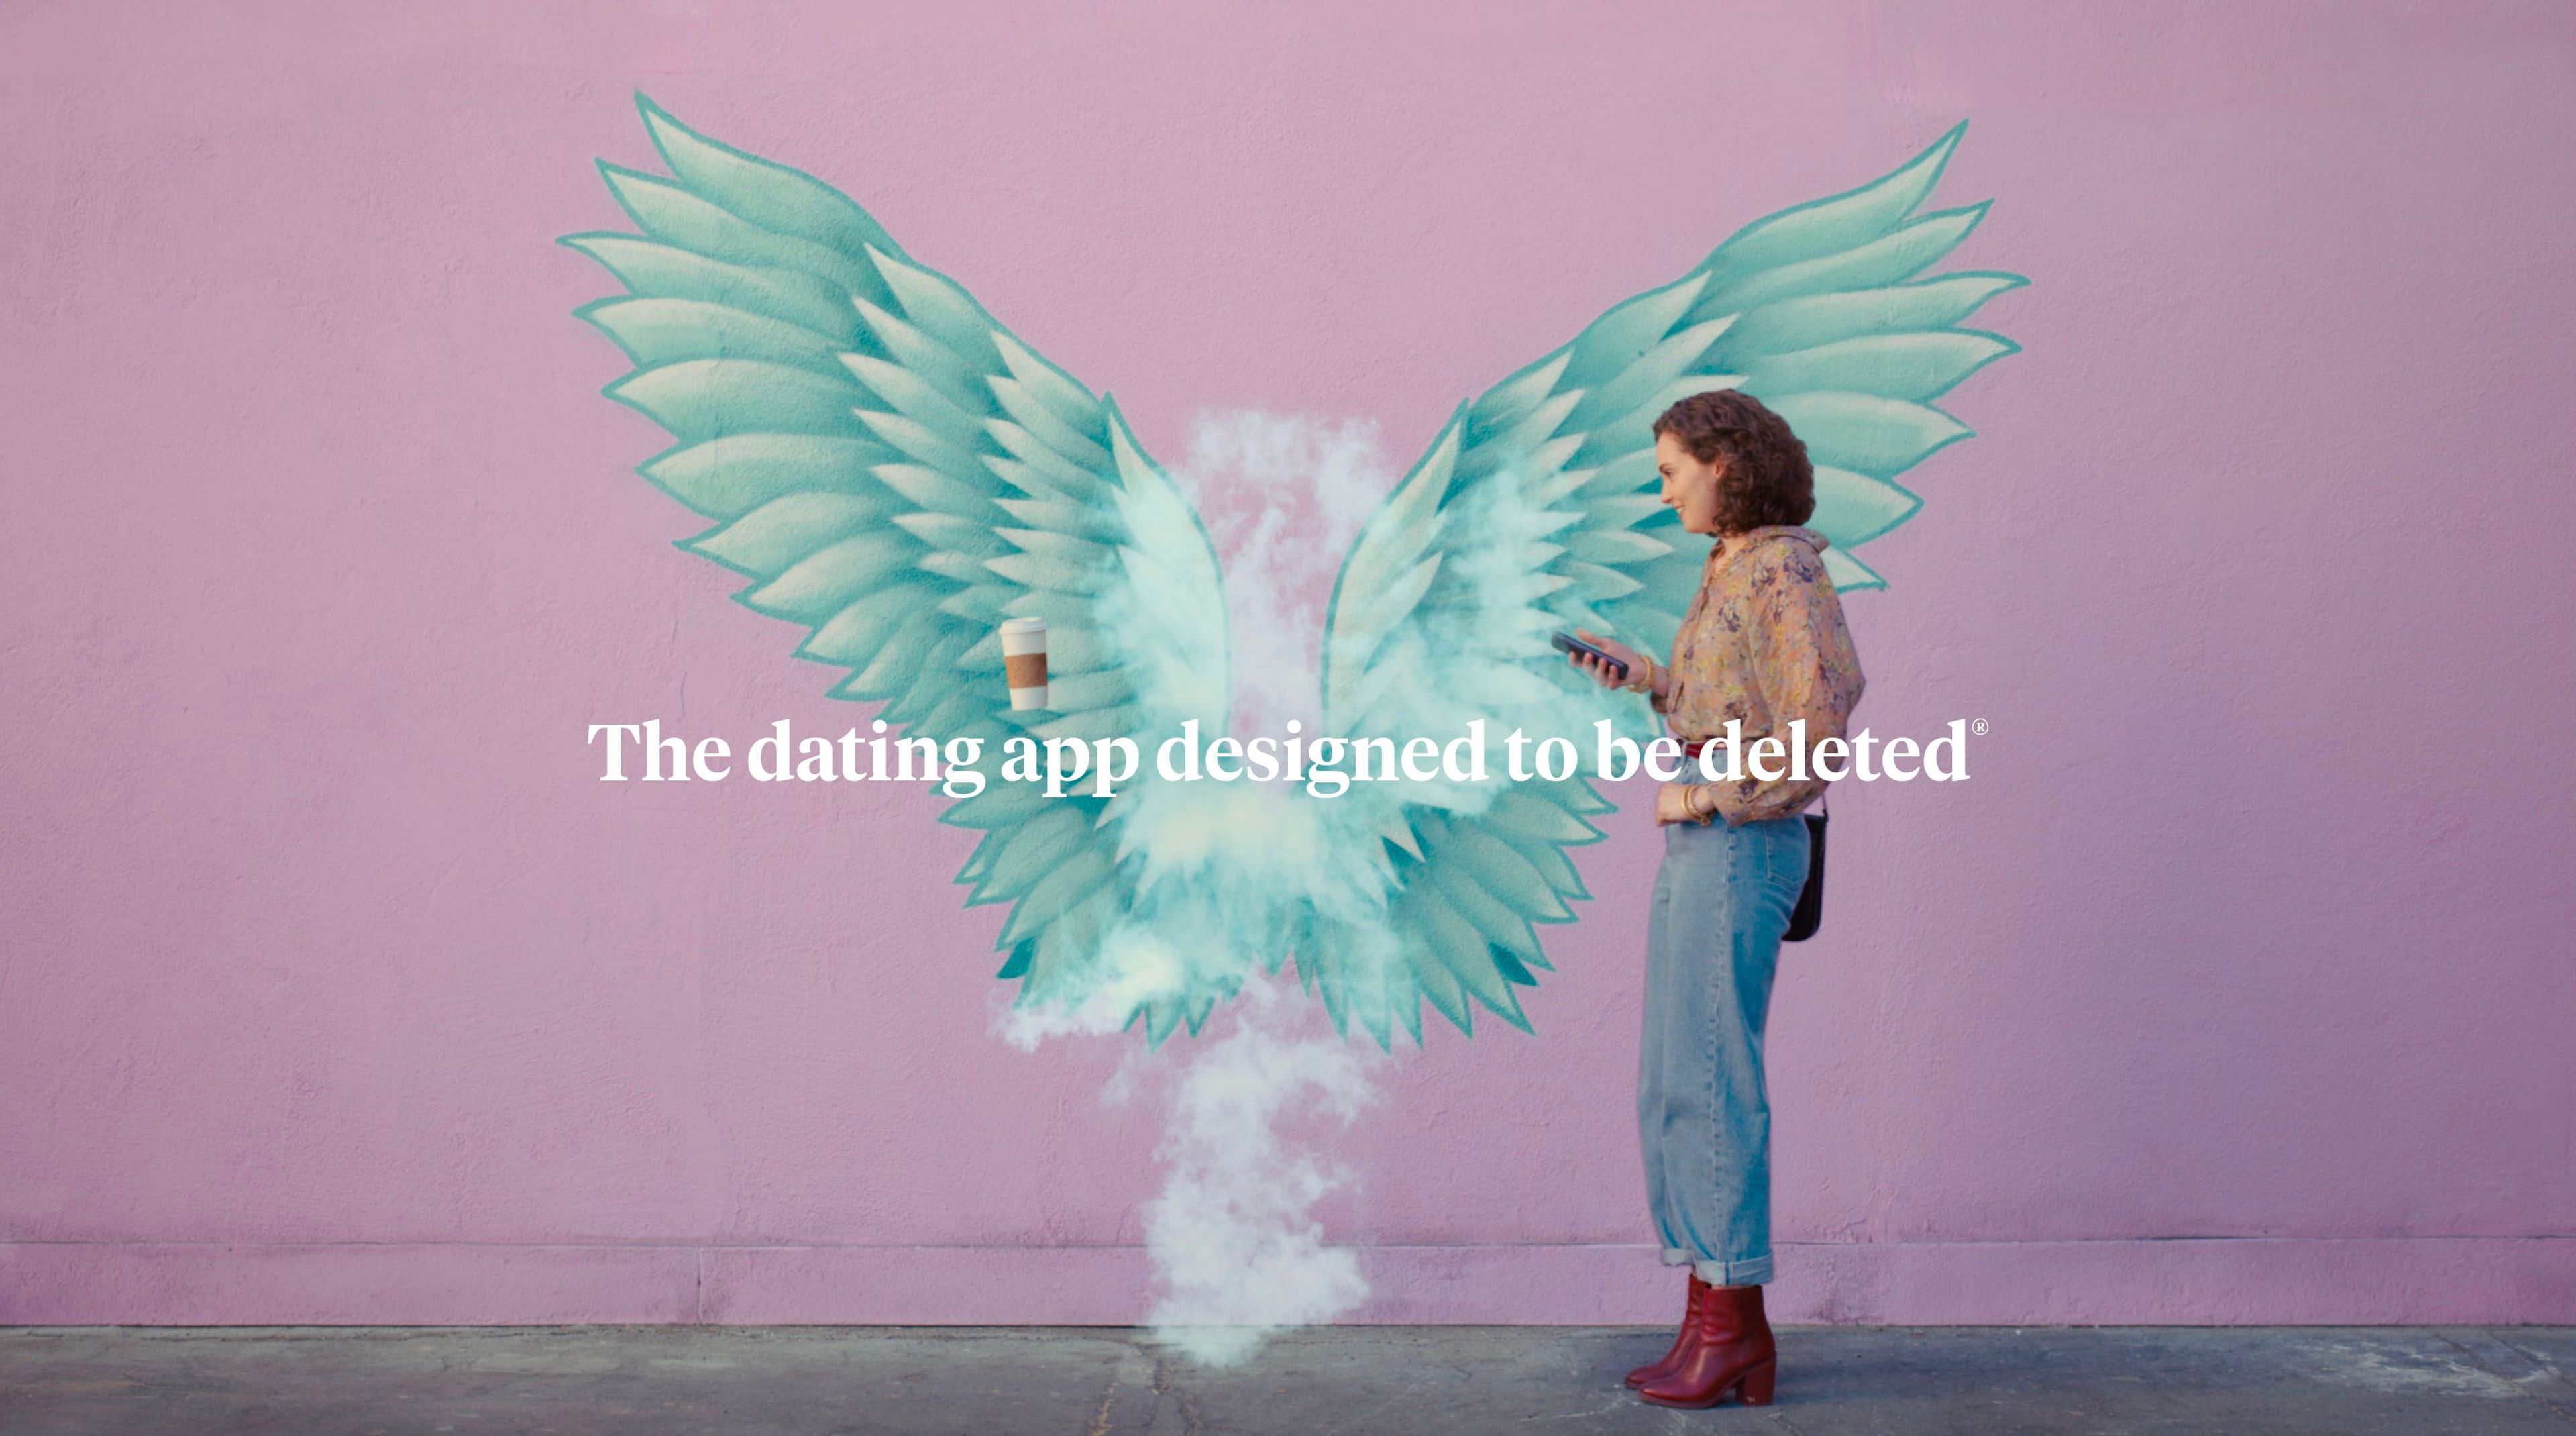 The dating app designed to be deleted